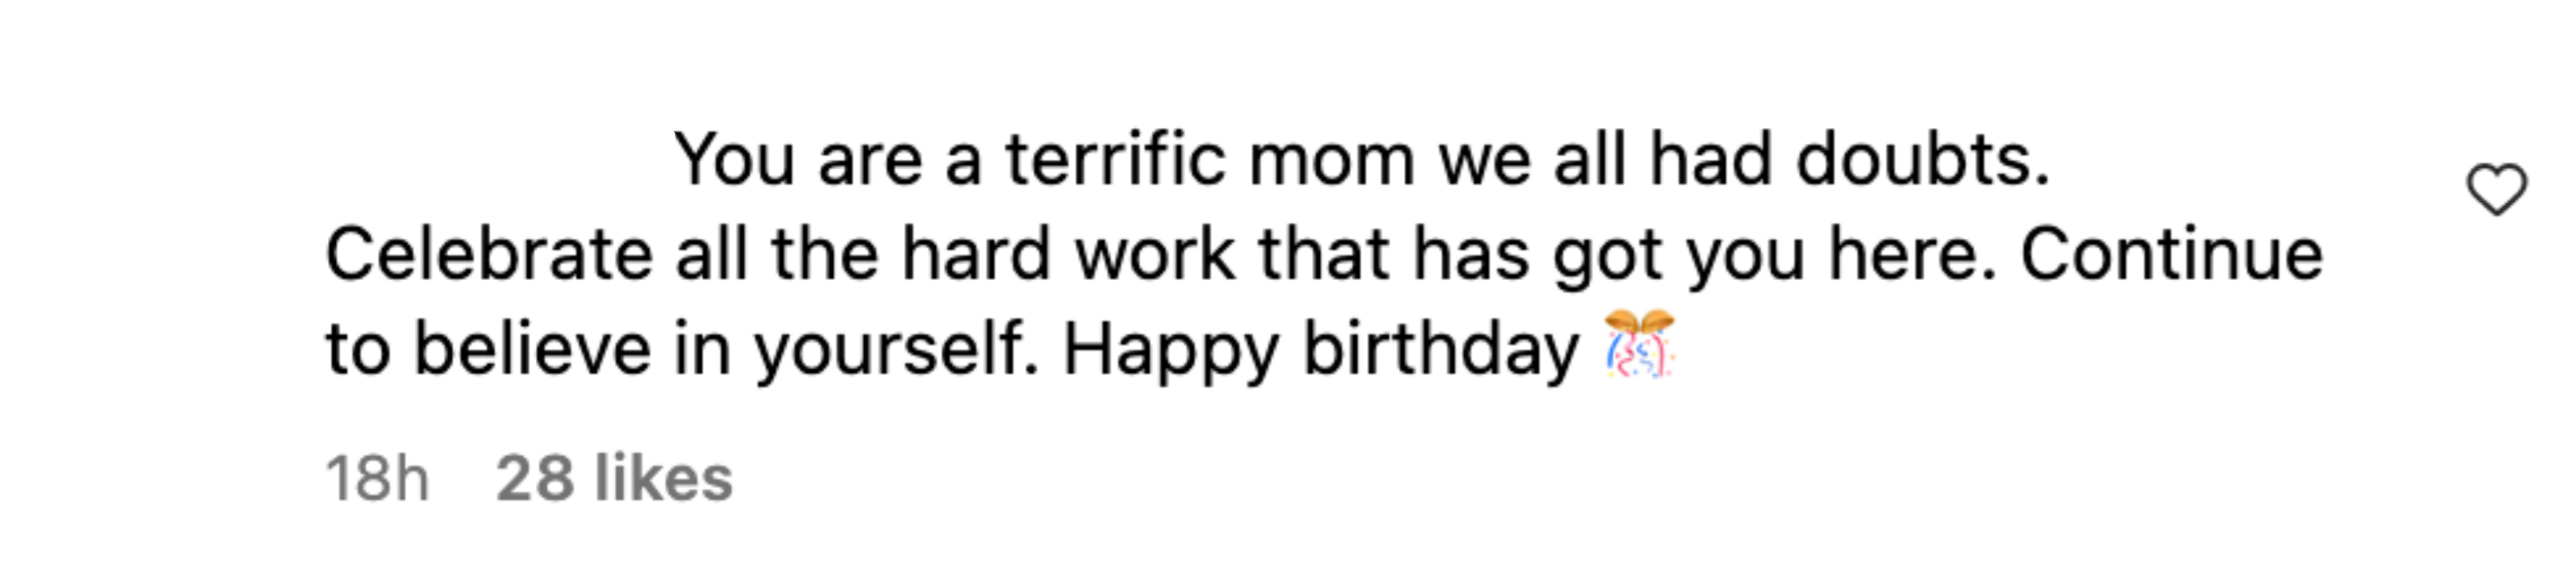 &quot;You are a terrific mom we all had doubts; celebrate all the hard work that has got you here; continue to believe in yourself, happy birthday&quot;